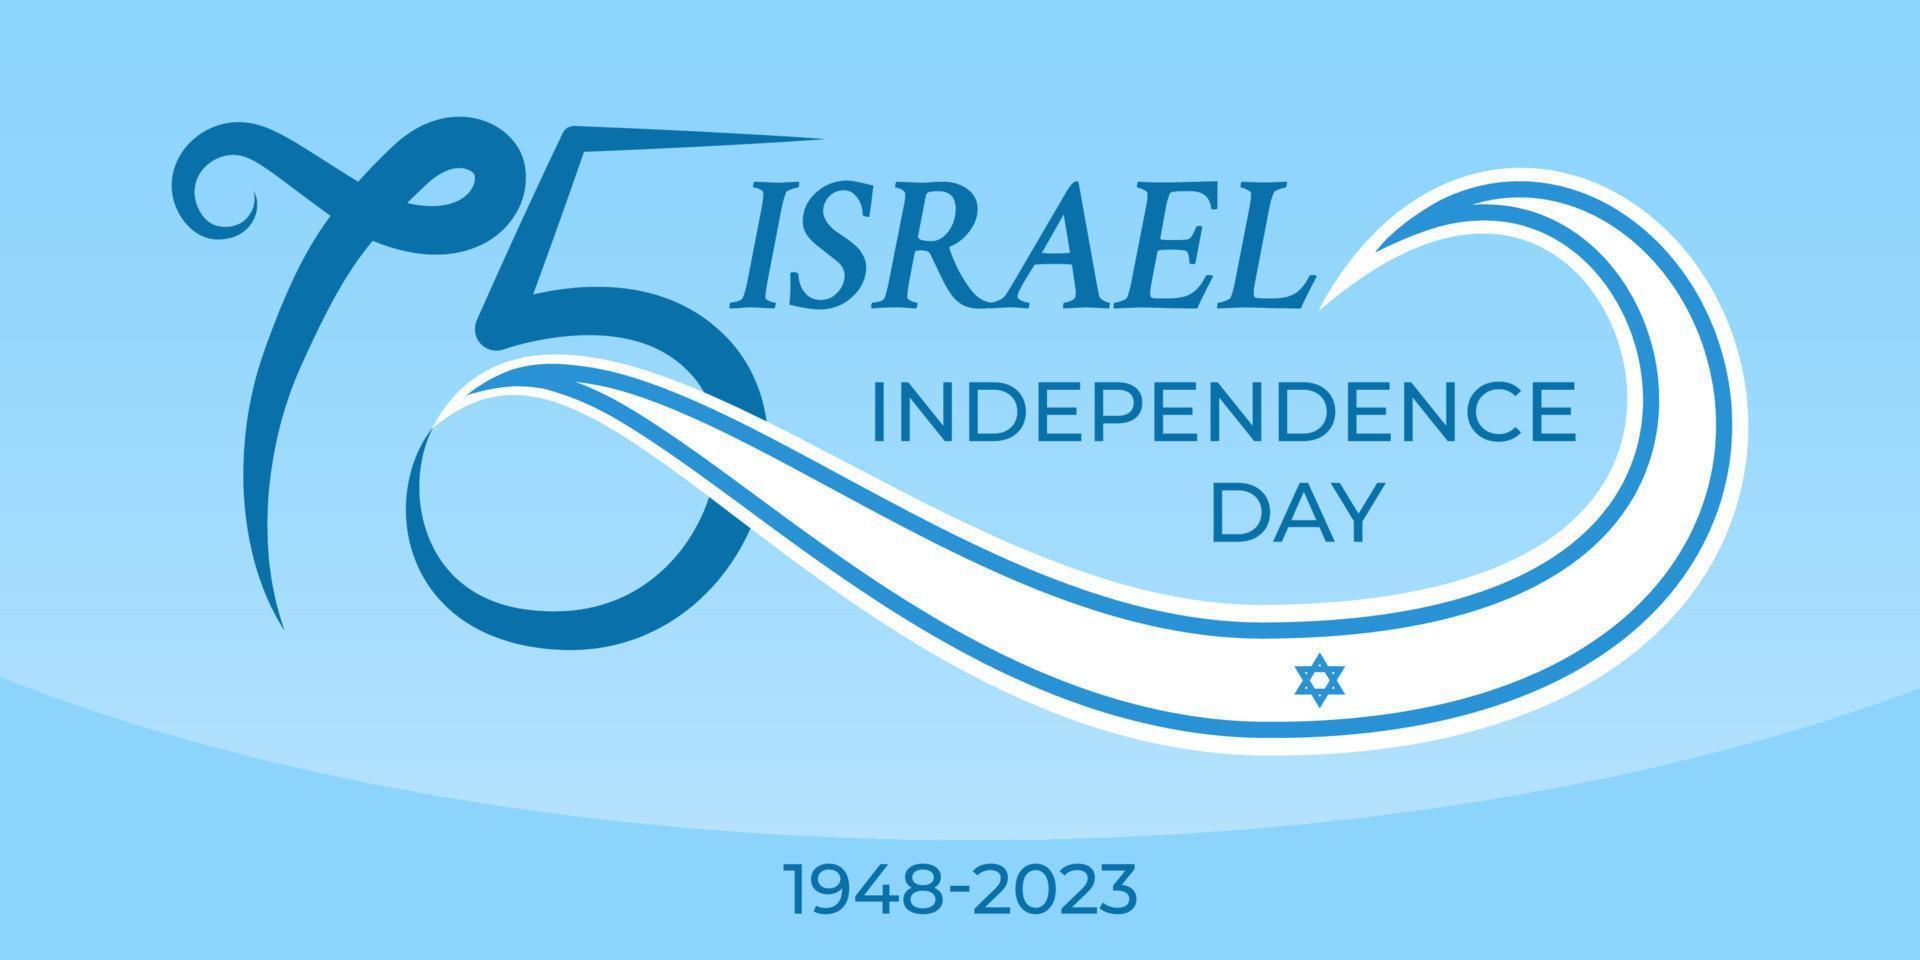 75 years anniversary Israel Independence Day. Greeting banner with number 75 and the Israeli flag. Great for logo, card, website, print, design, poster, social media. Vector flat style illustration